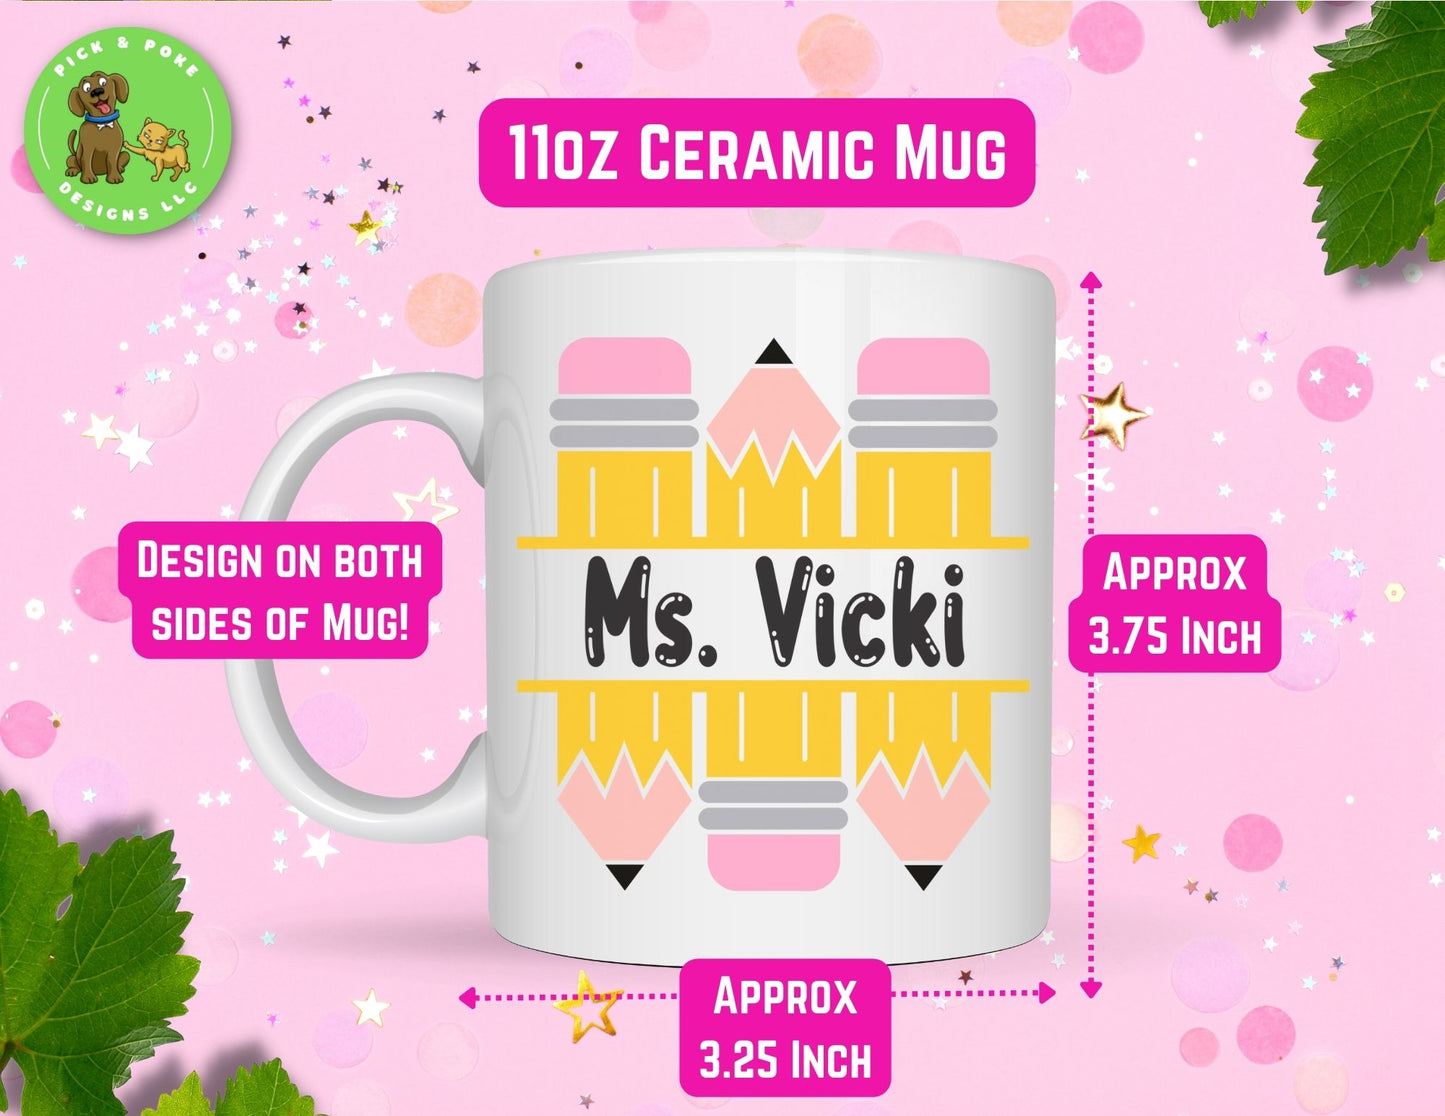 11oz ceramic mug has the pencil and name design printed on both sides of the cup